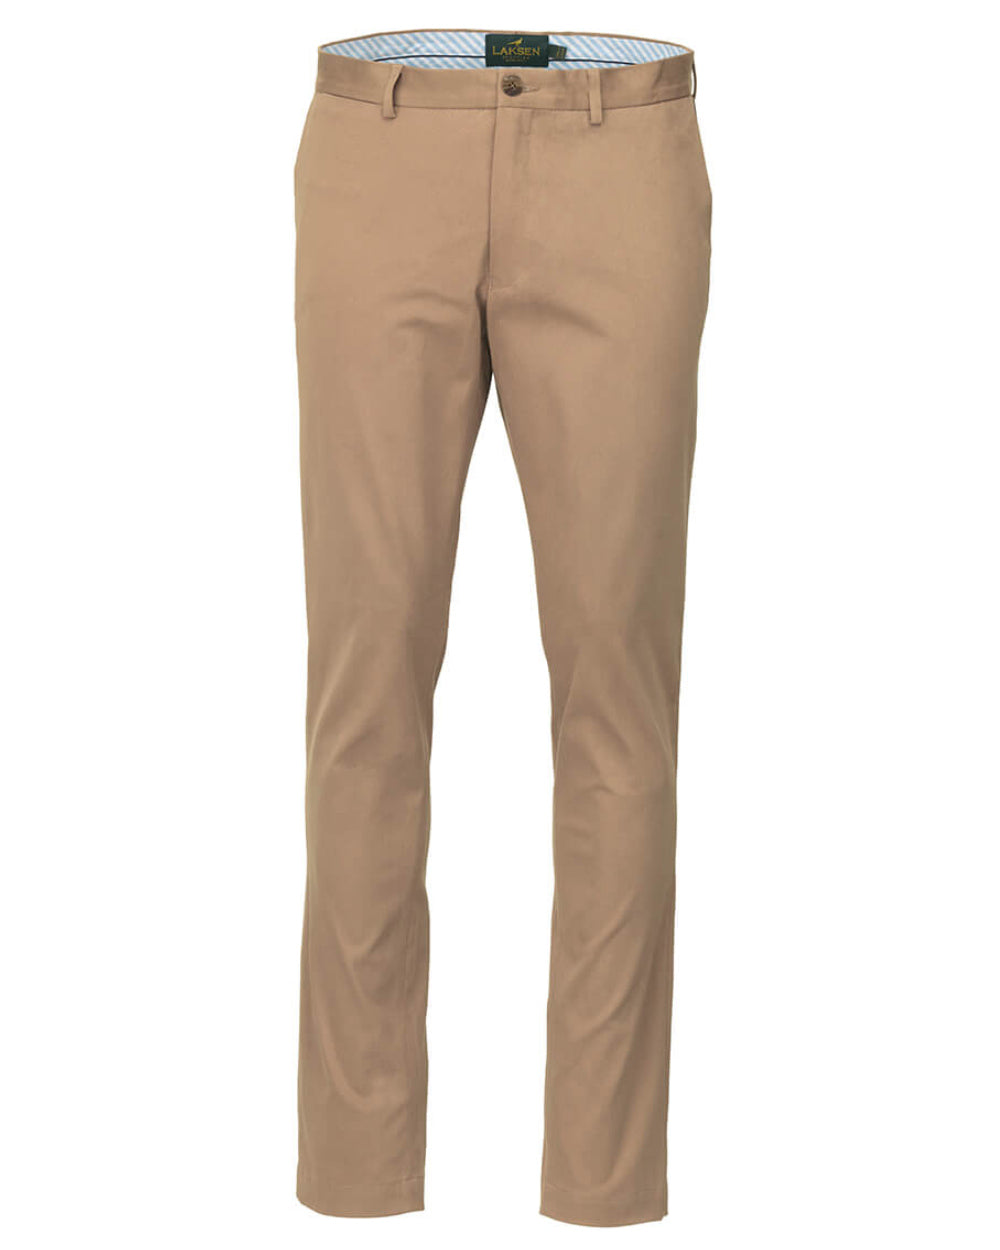 Sand Coloured Laksen Lumley Chino Trousers On A White Background 